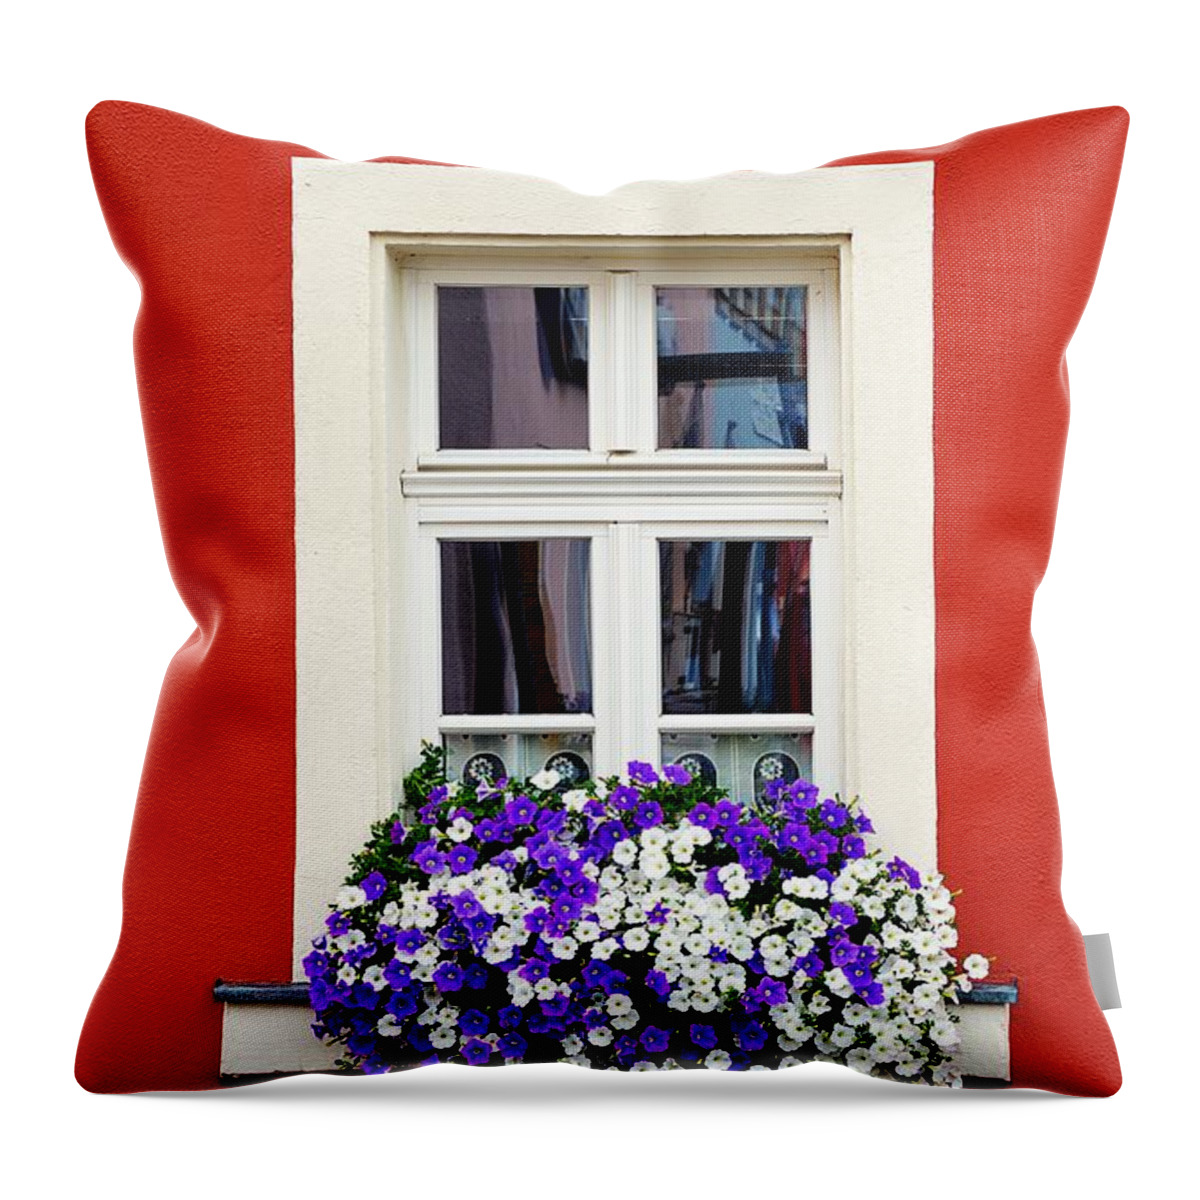 Architecture Throw Pillow featuring the photograph Window by Thomas Schroeder